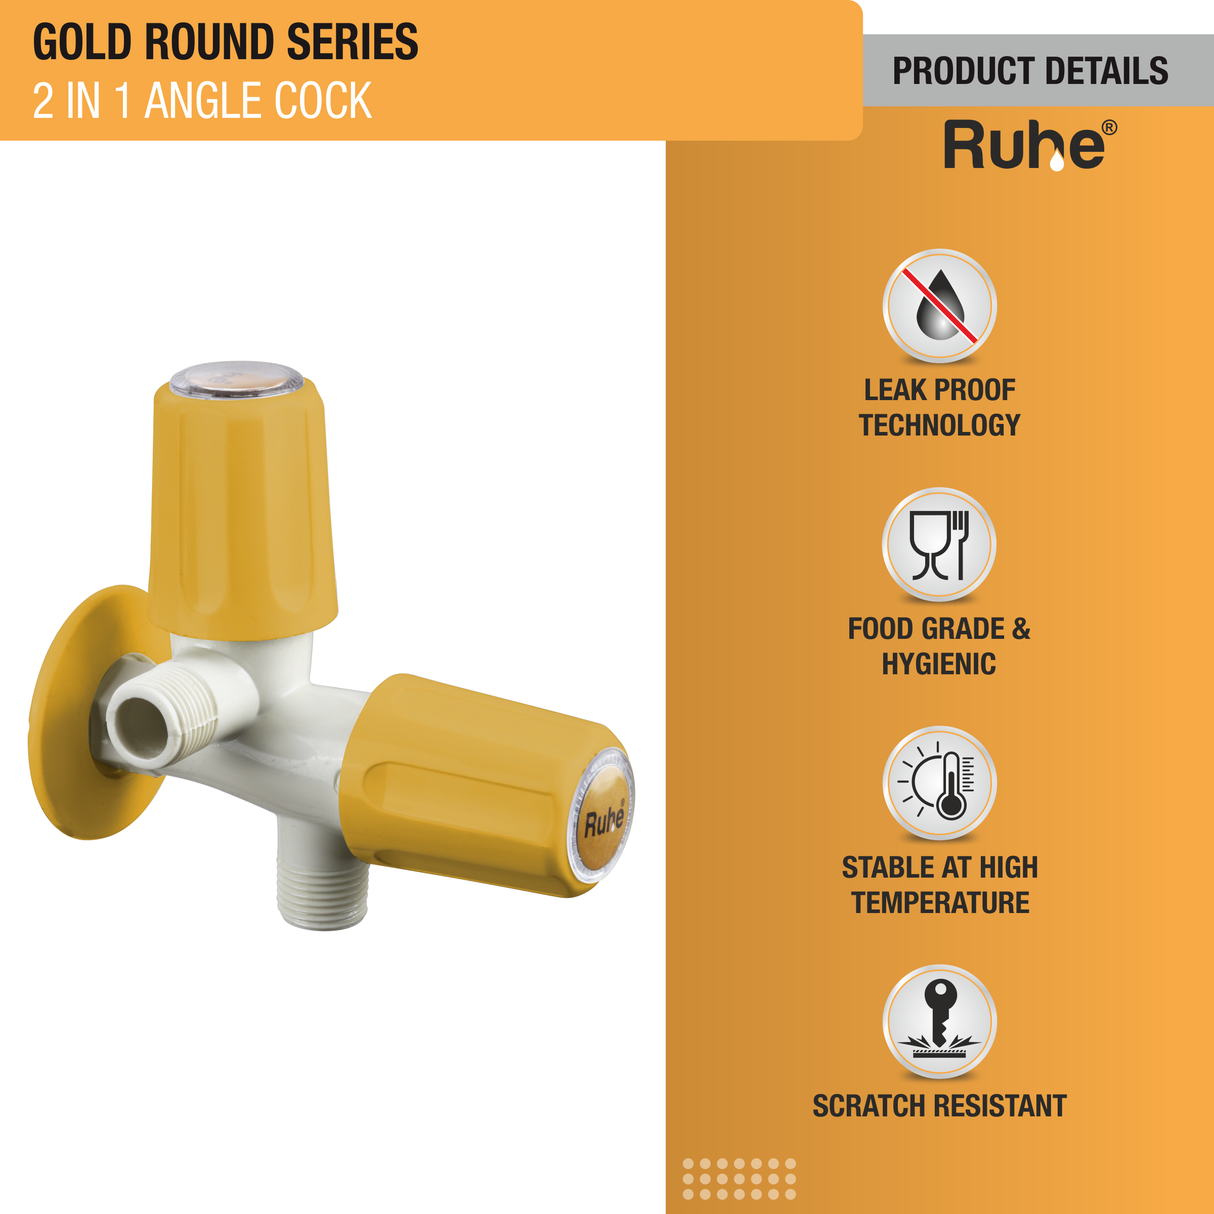 Gold Round PTMT 2 in 1 Angle Cock Faucet details